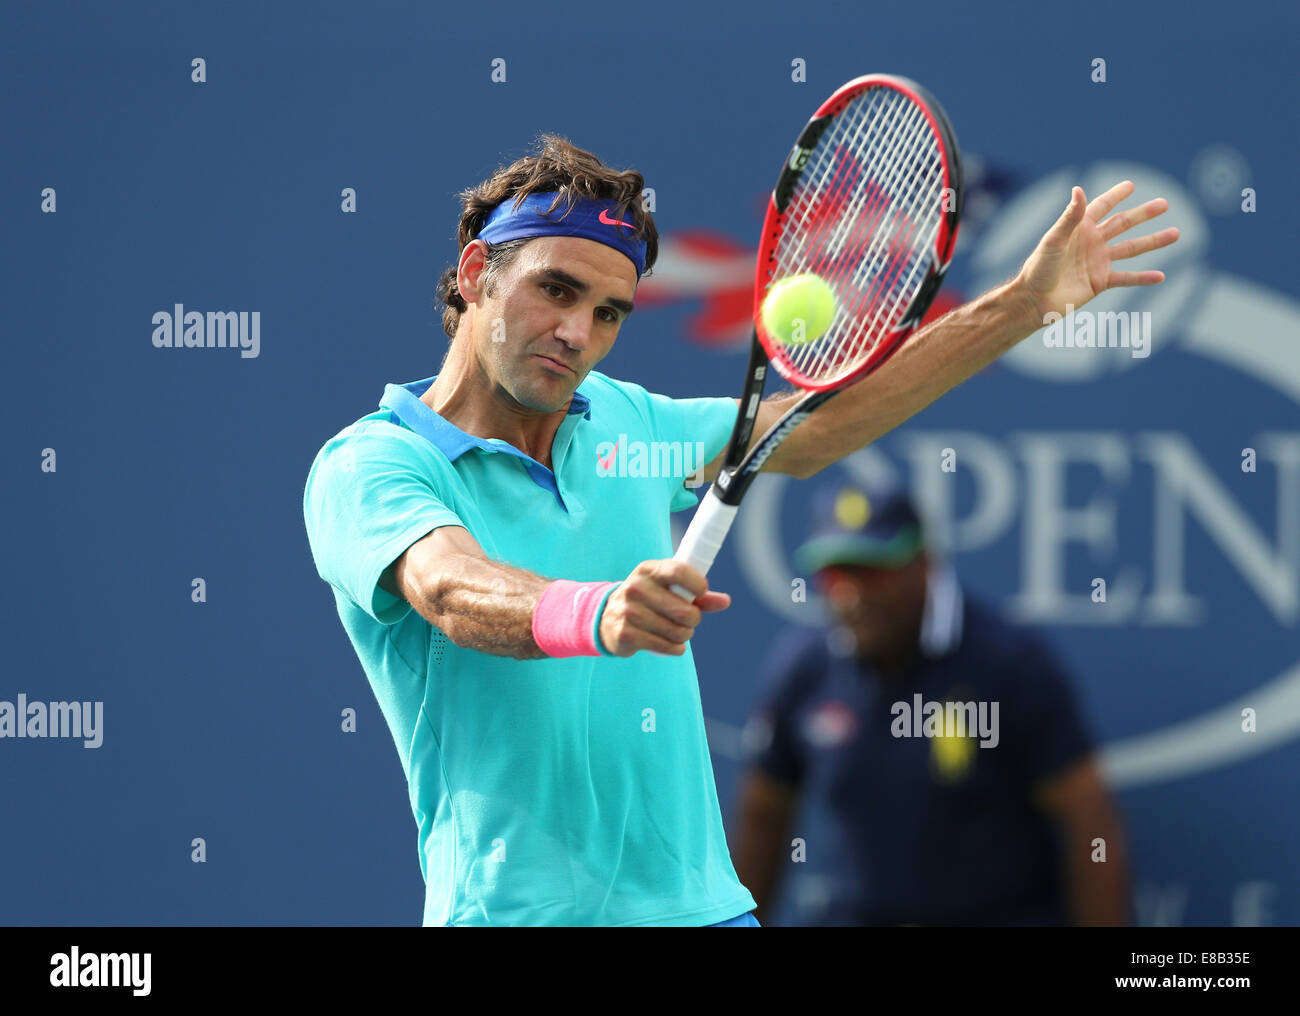 Roger Federer (SUI) in Aktion bei den US Open 2014 Championships in New York, USA. Stockfoto